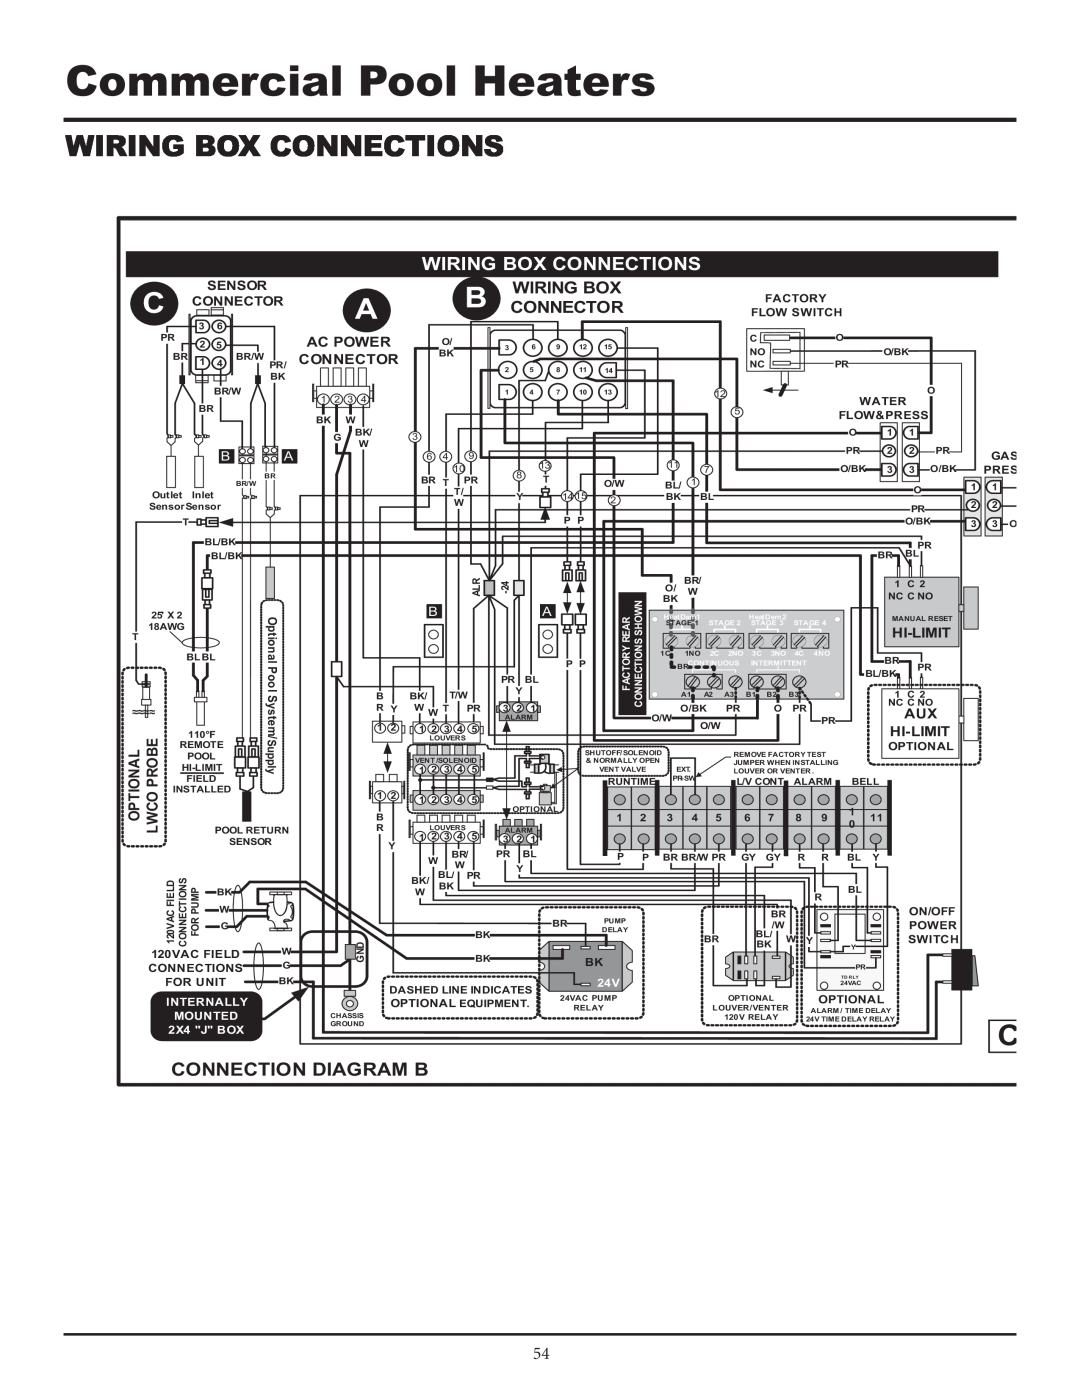 Lochinvar F0600187510 Wiring Box Connections, Connection Diagram B, B Connector, Commercial Pool Heaters, Optional, Water 